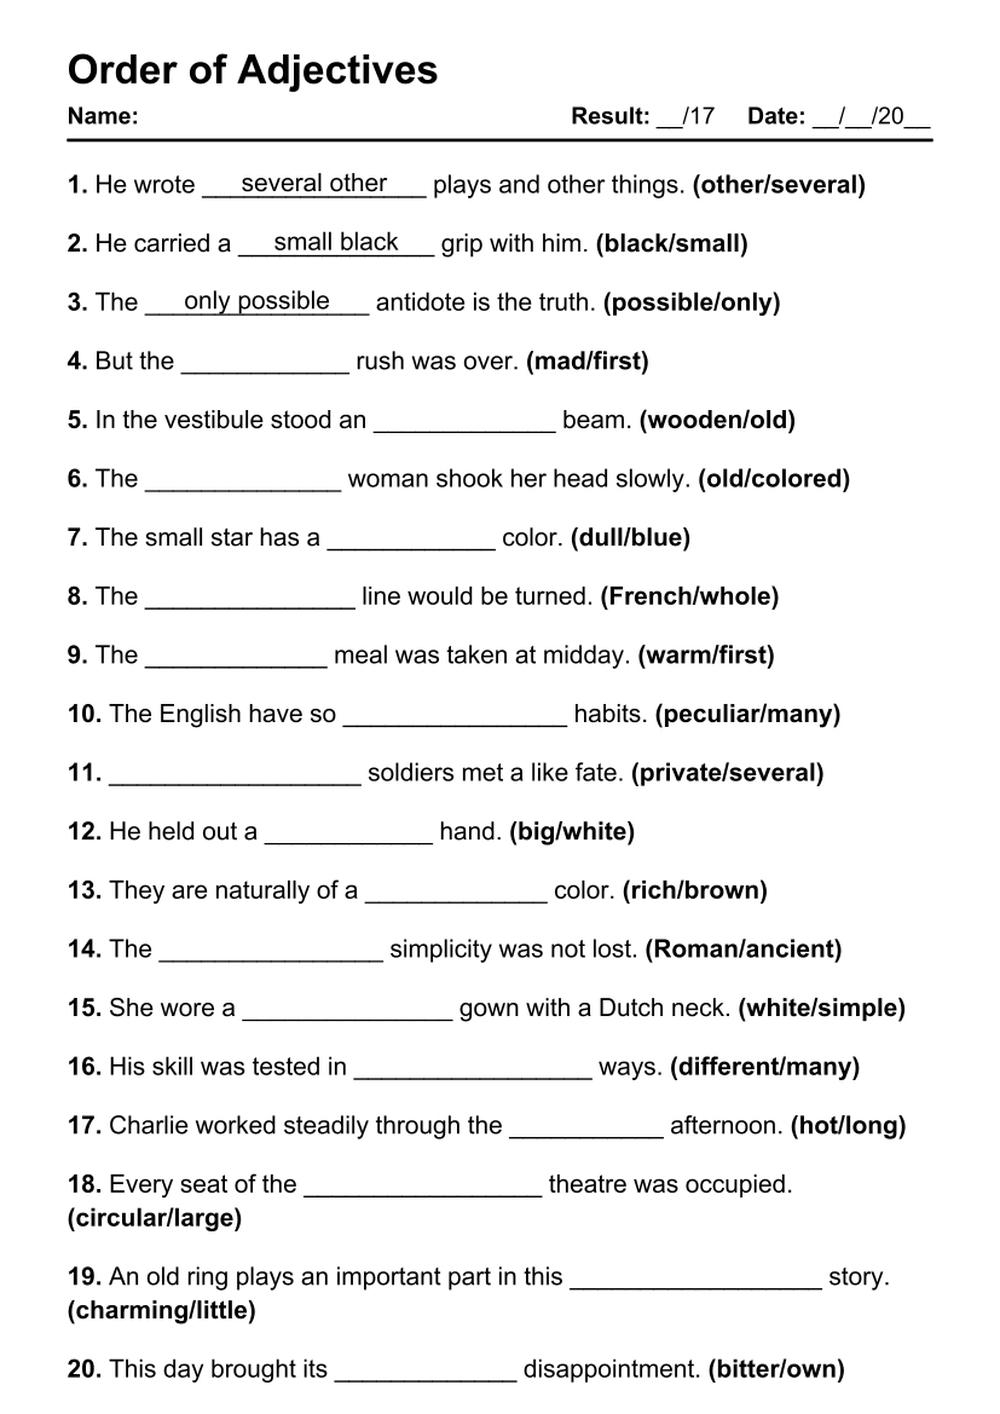 101 Printable Order Of Adjectives PDF Worksheets With Answers Grammarism